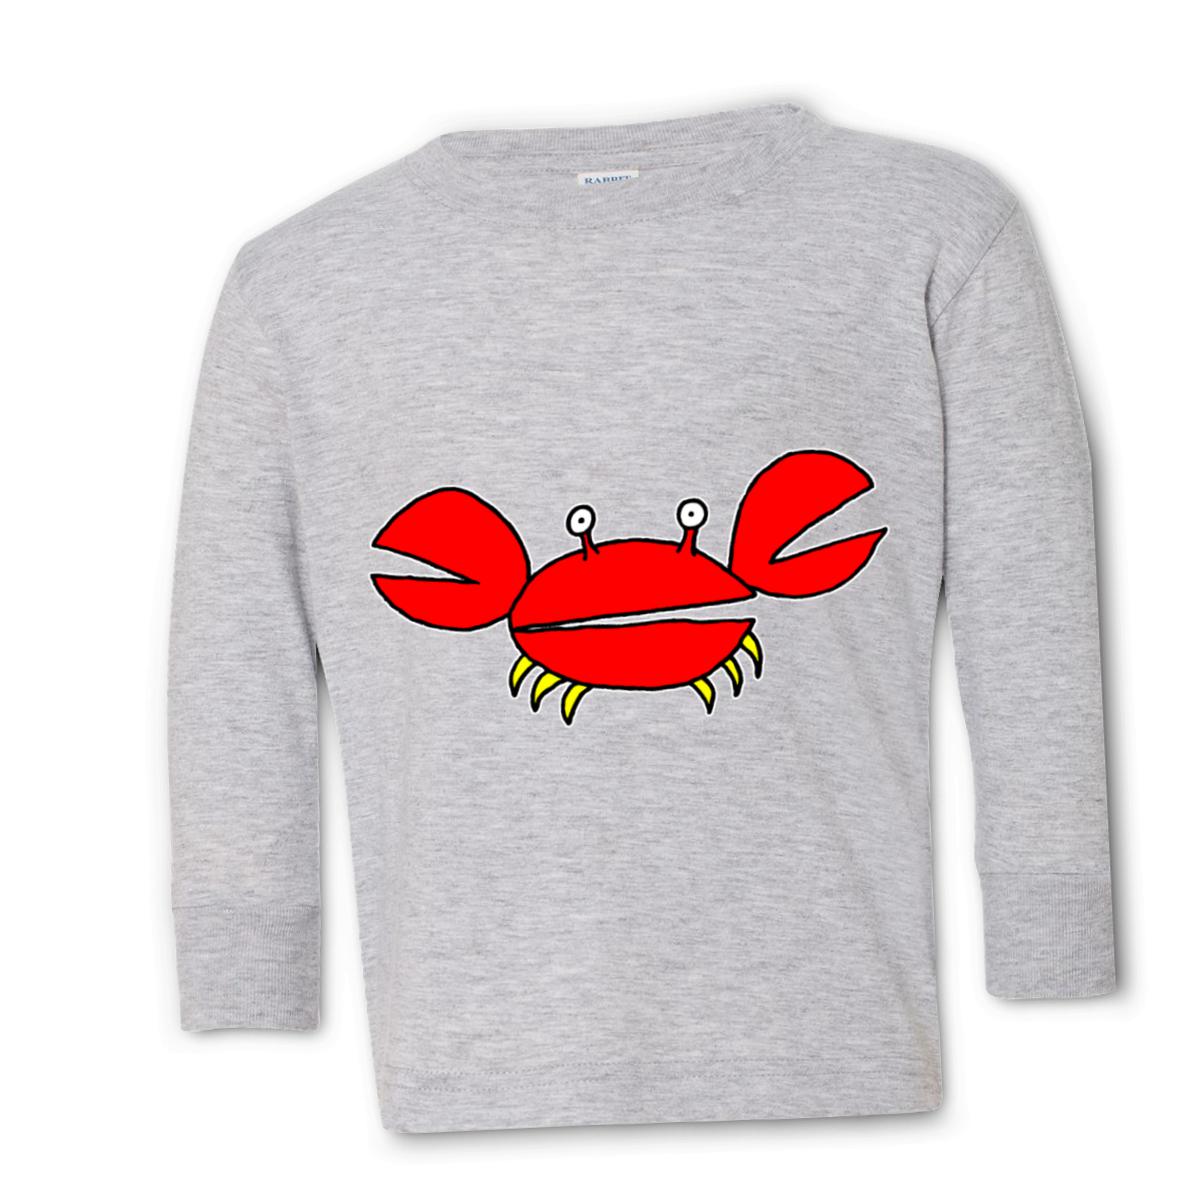 Crab Toddler Long Sleeve Tee 2T heather